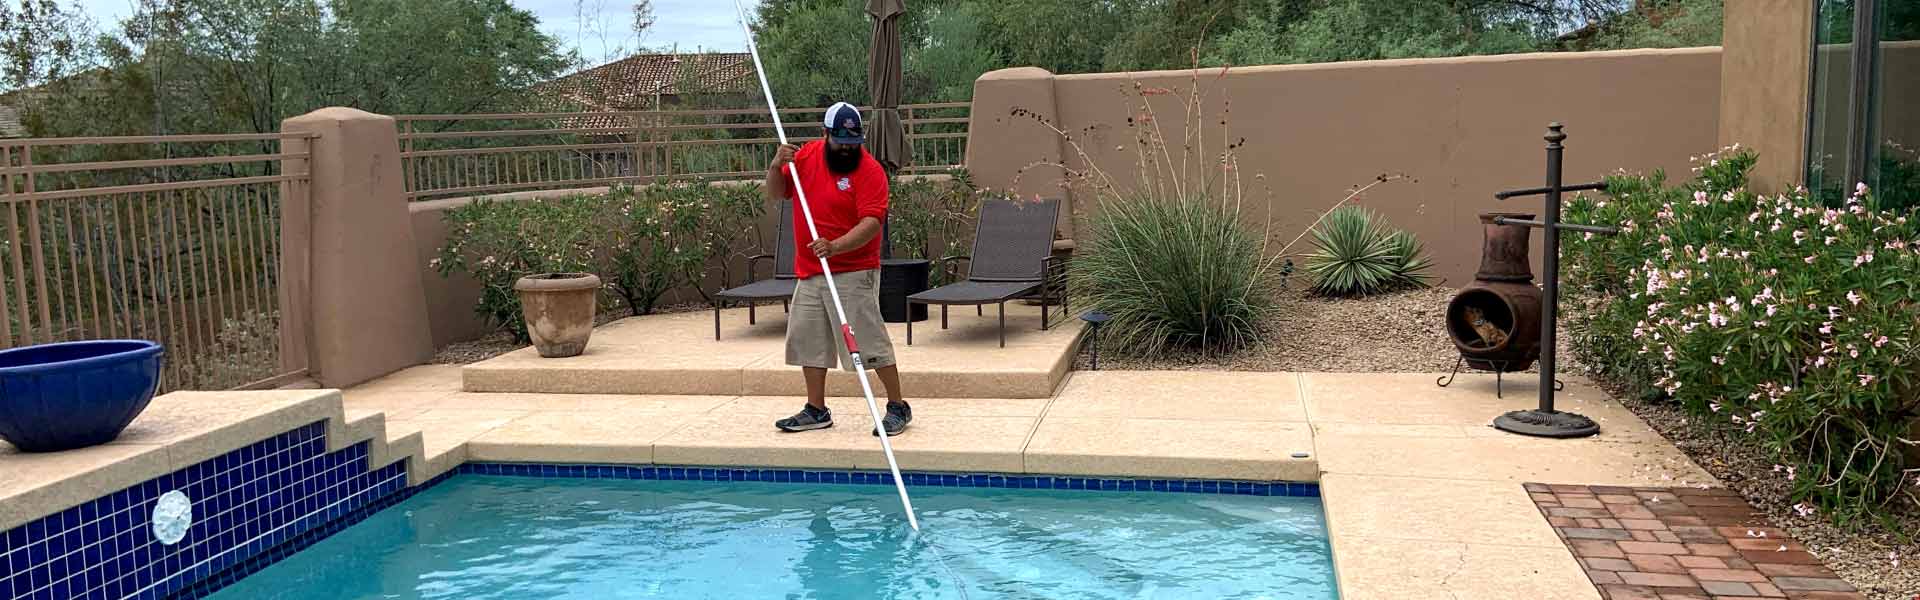 Pool Scouts technician cleaning a swimming pool